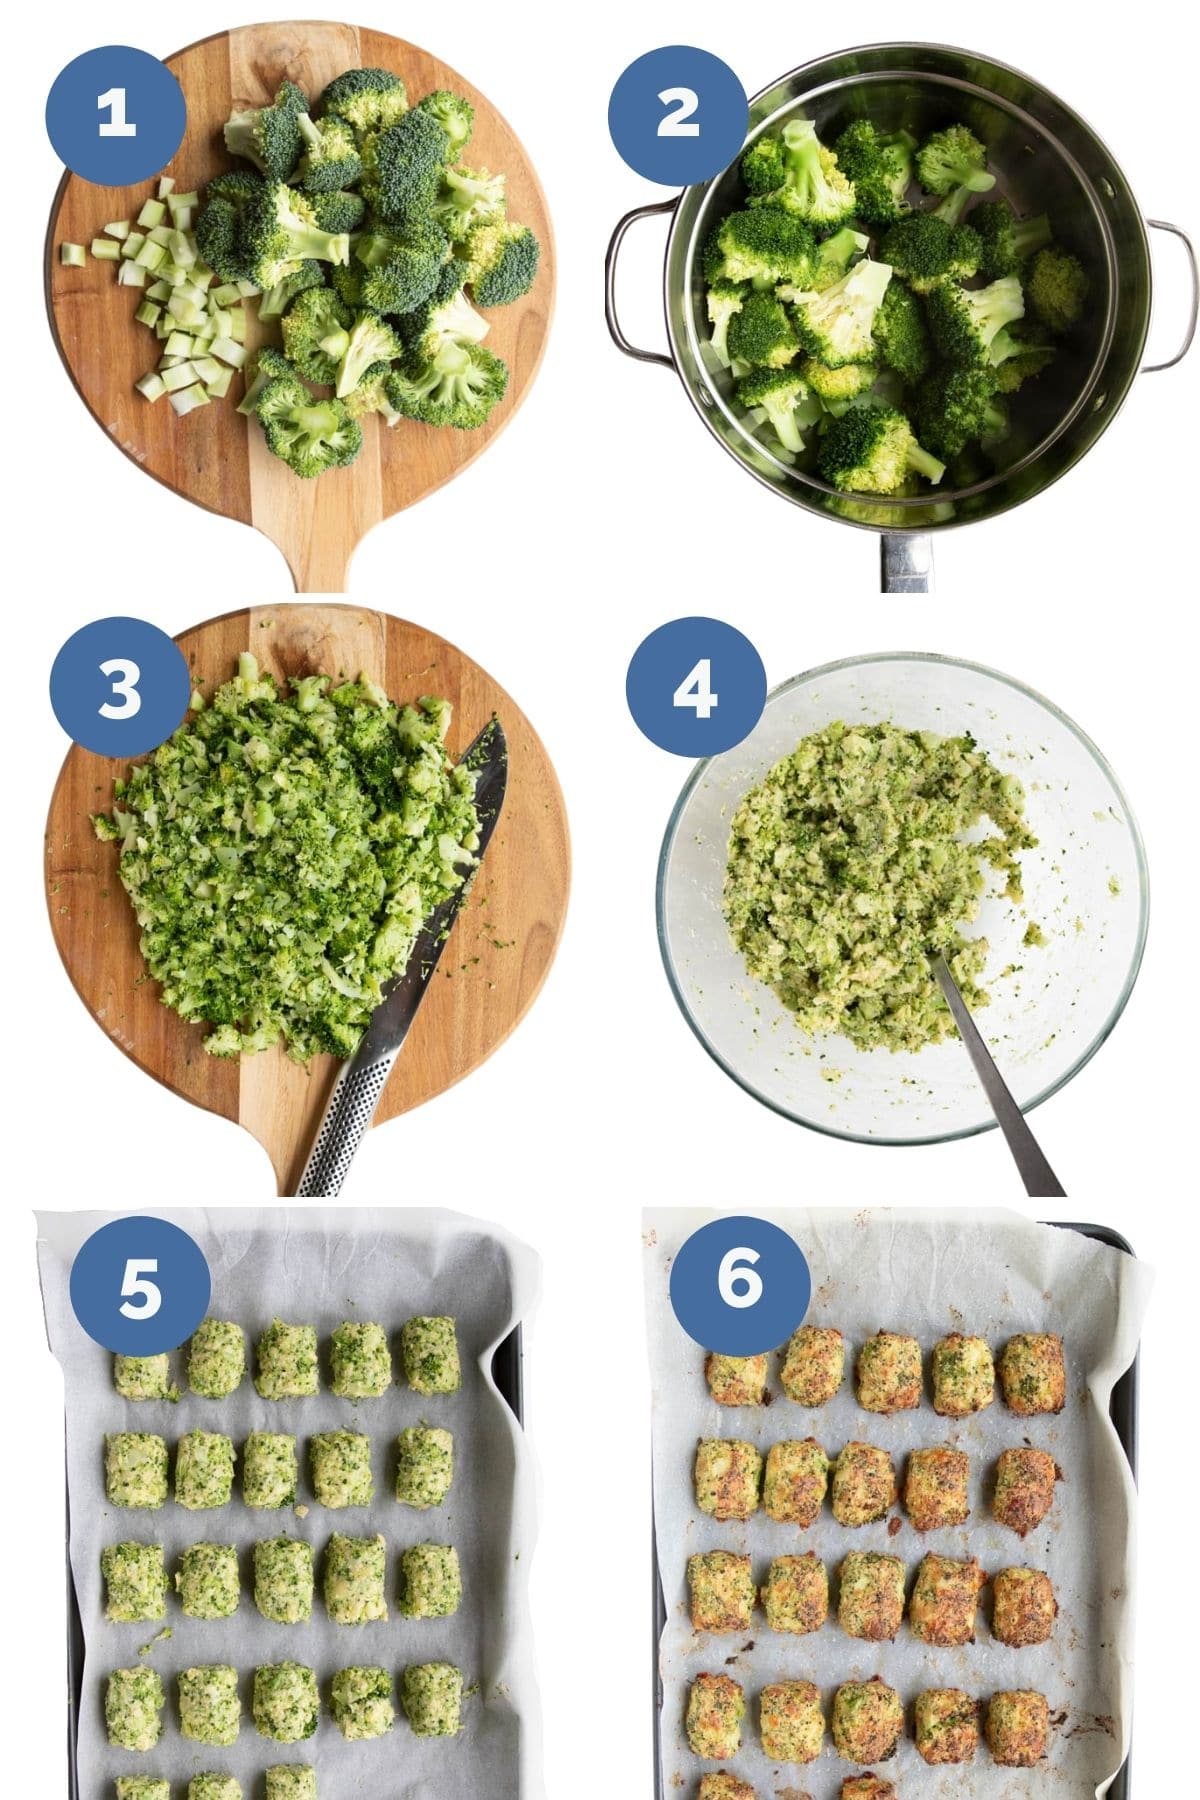 Collage of Six Images Showing How to Make Broccoli Tots